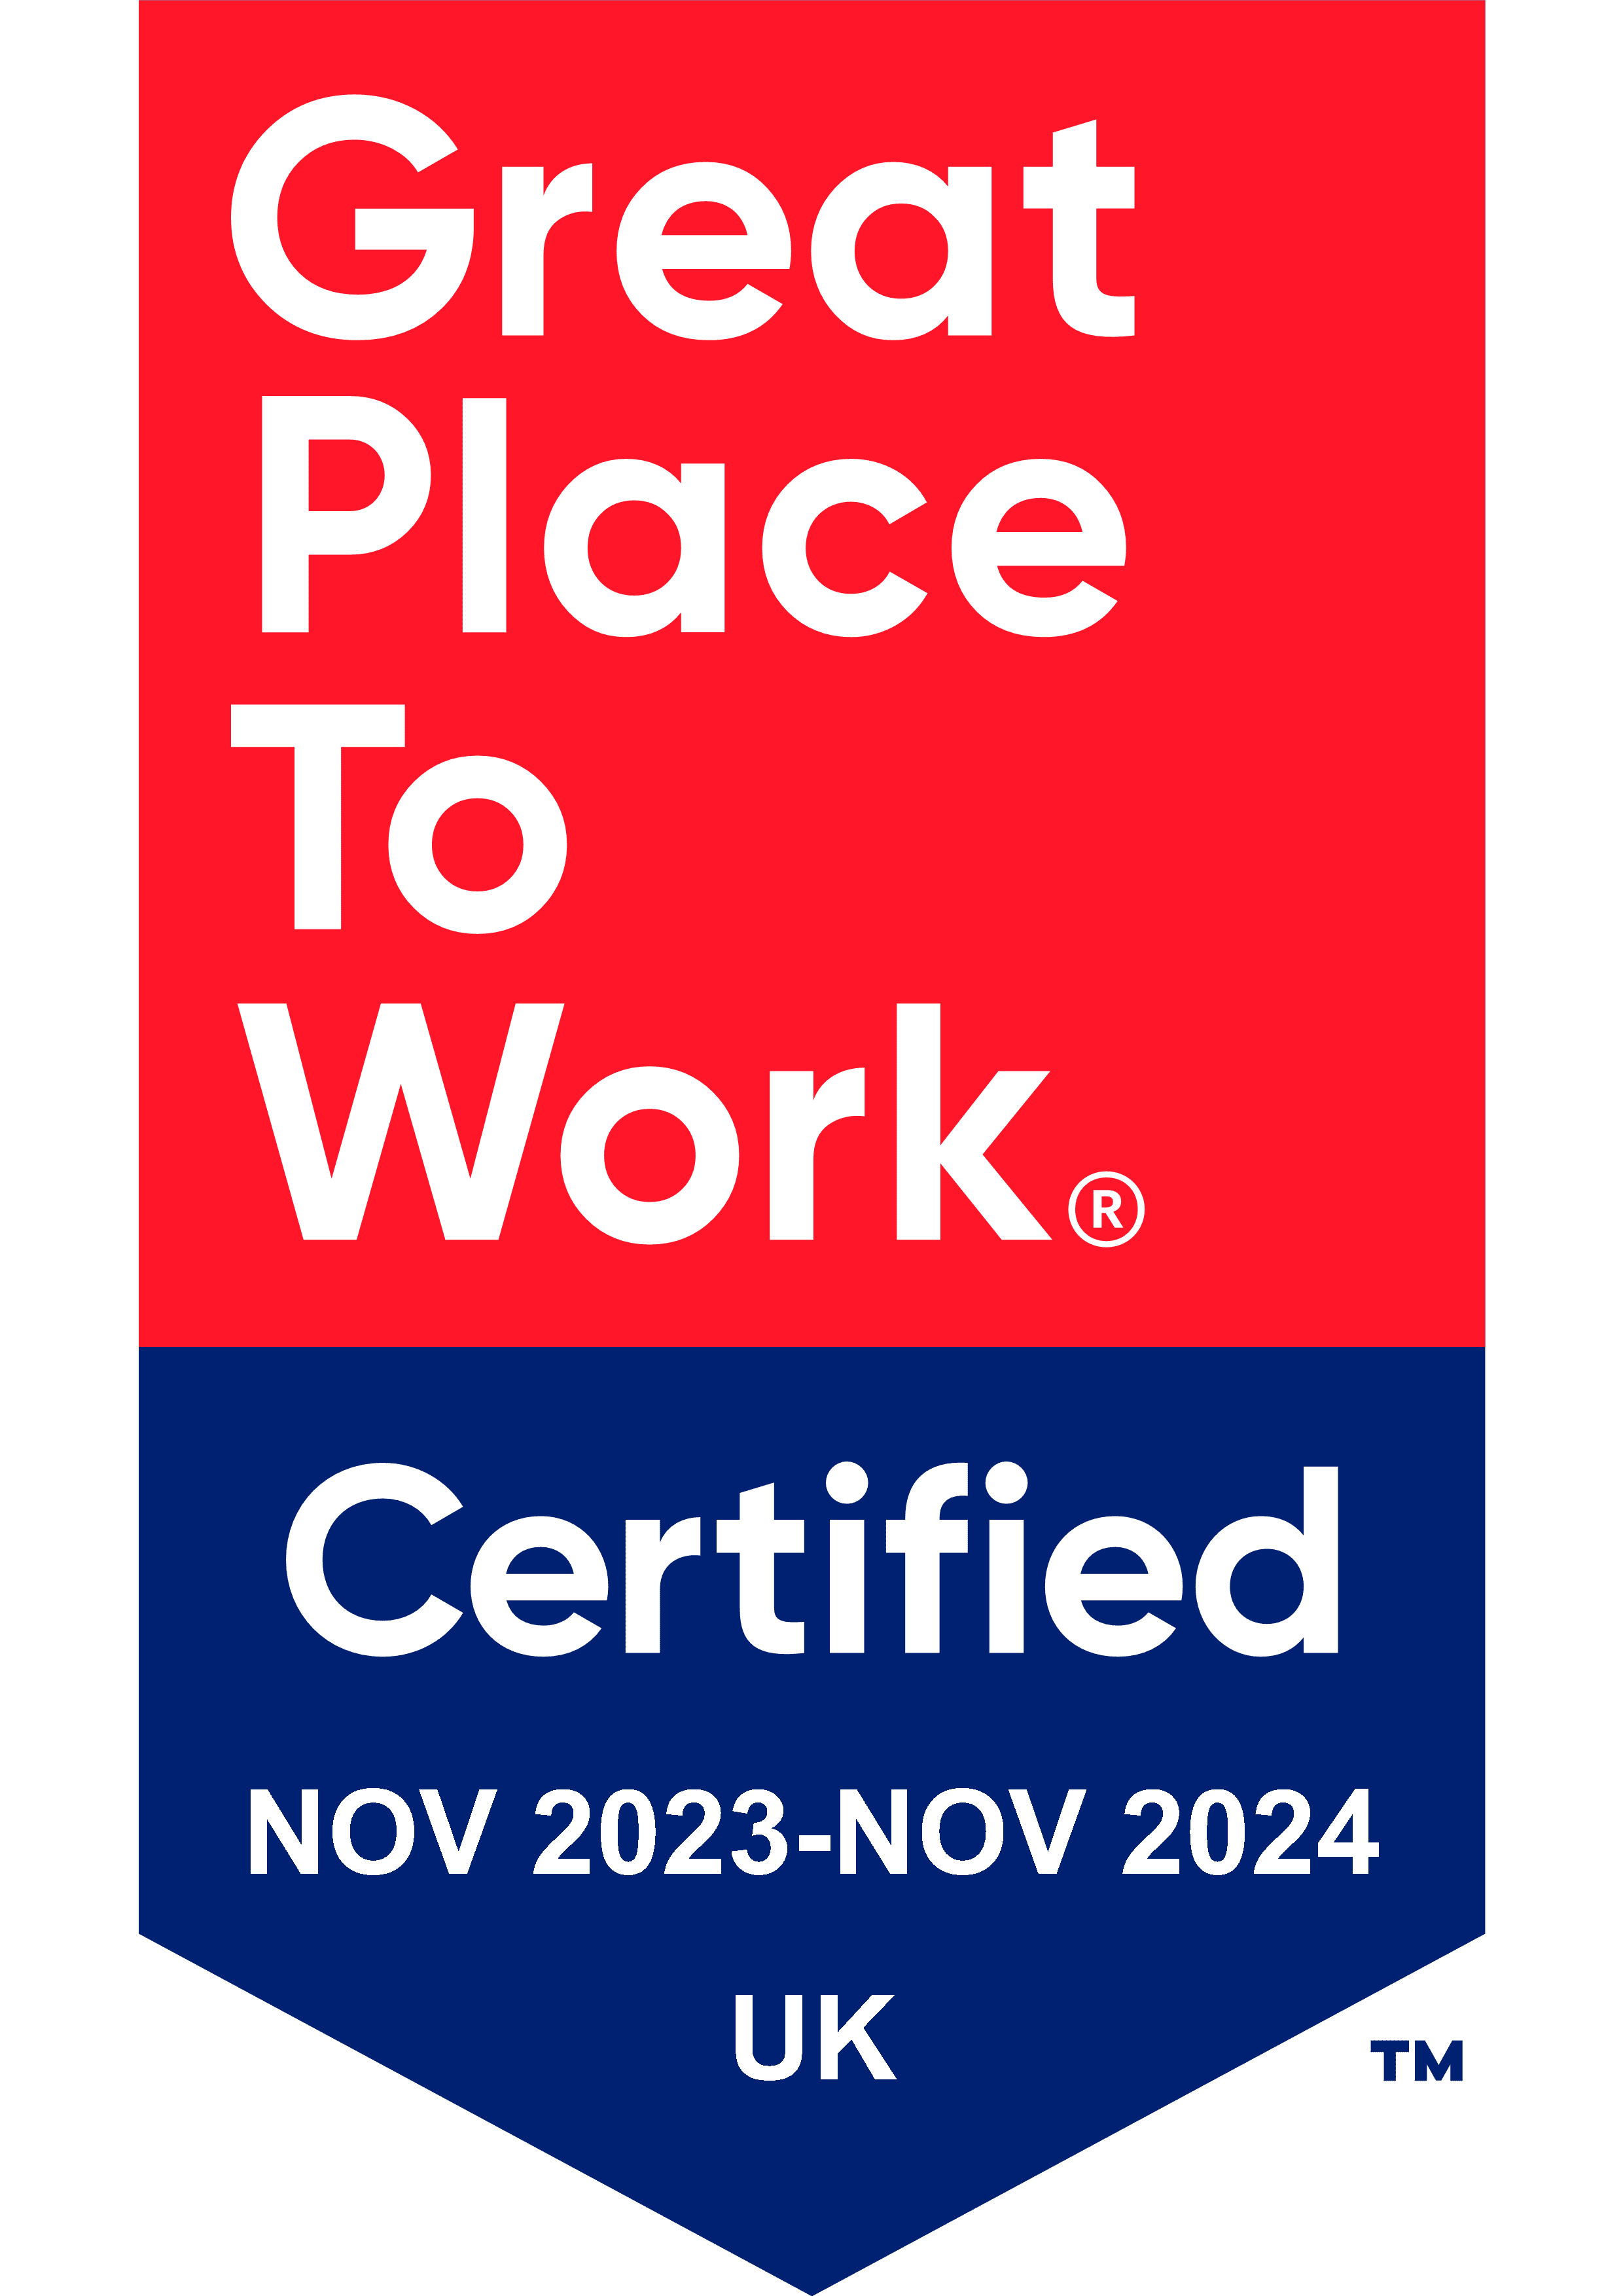 Great Place To Work - Certified award logo